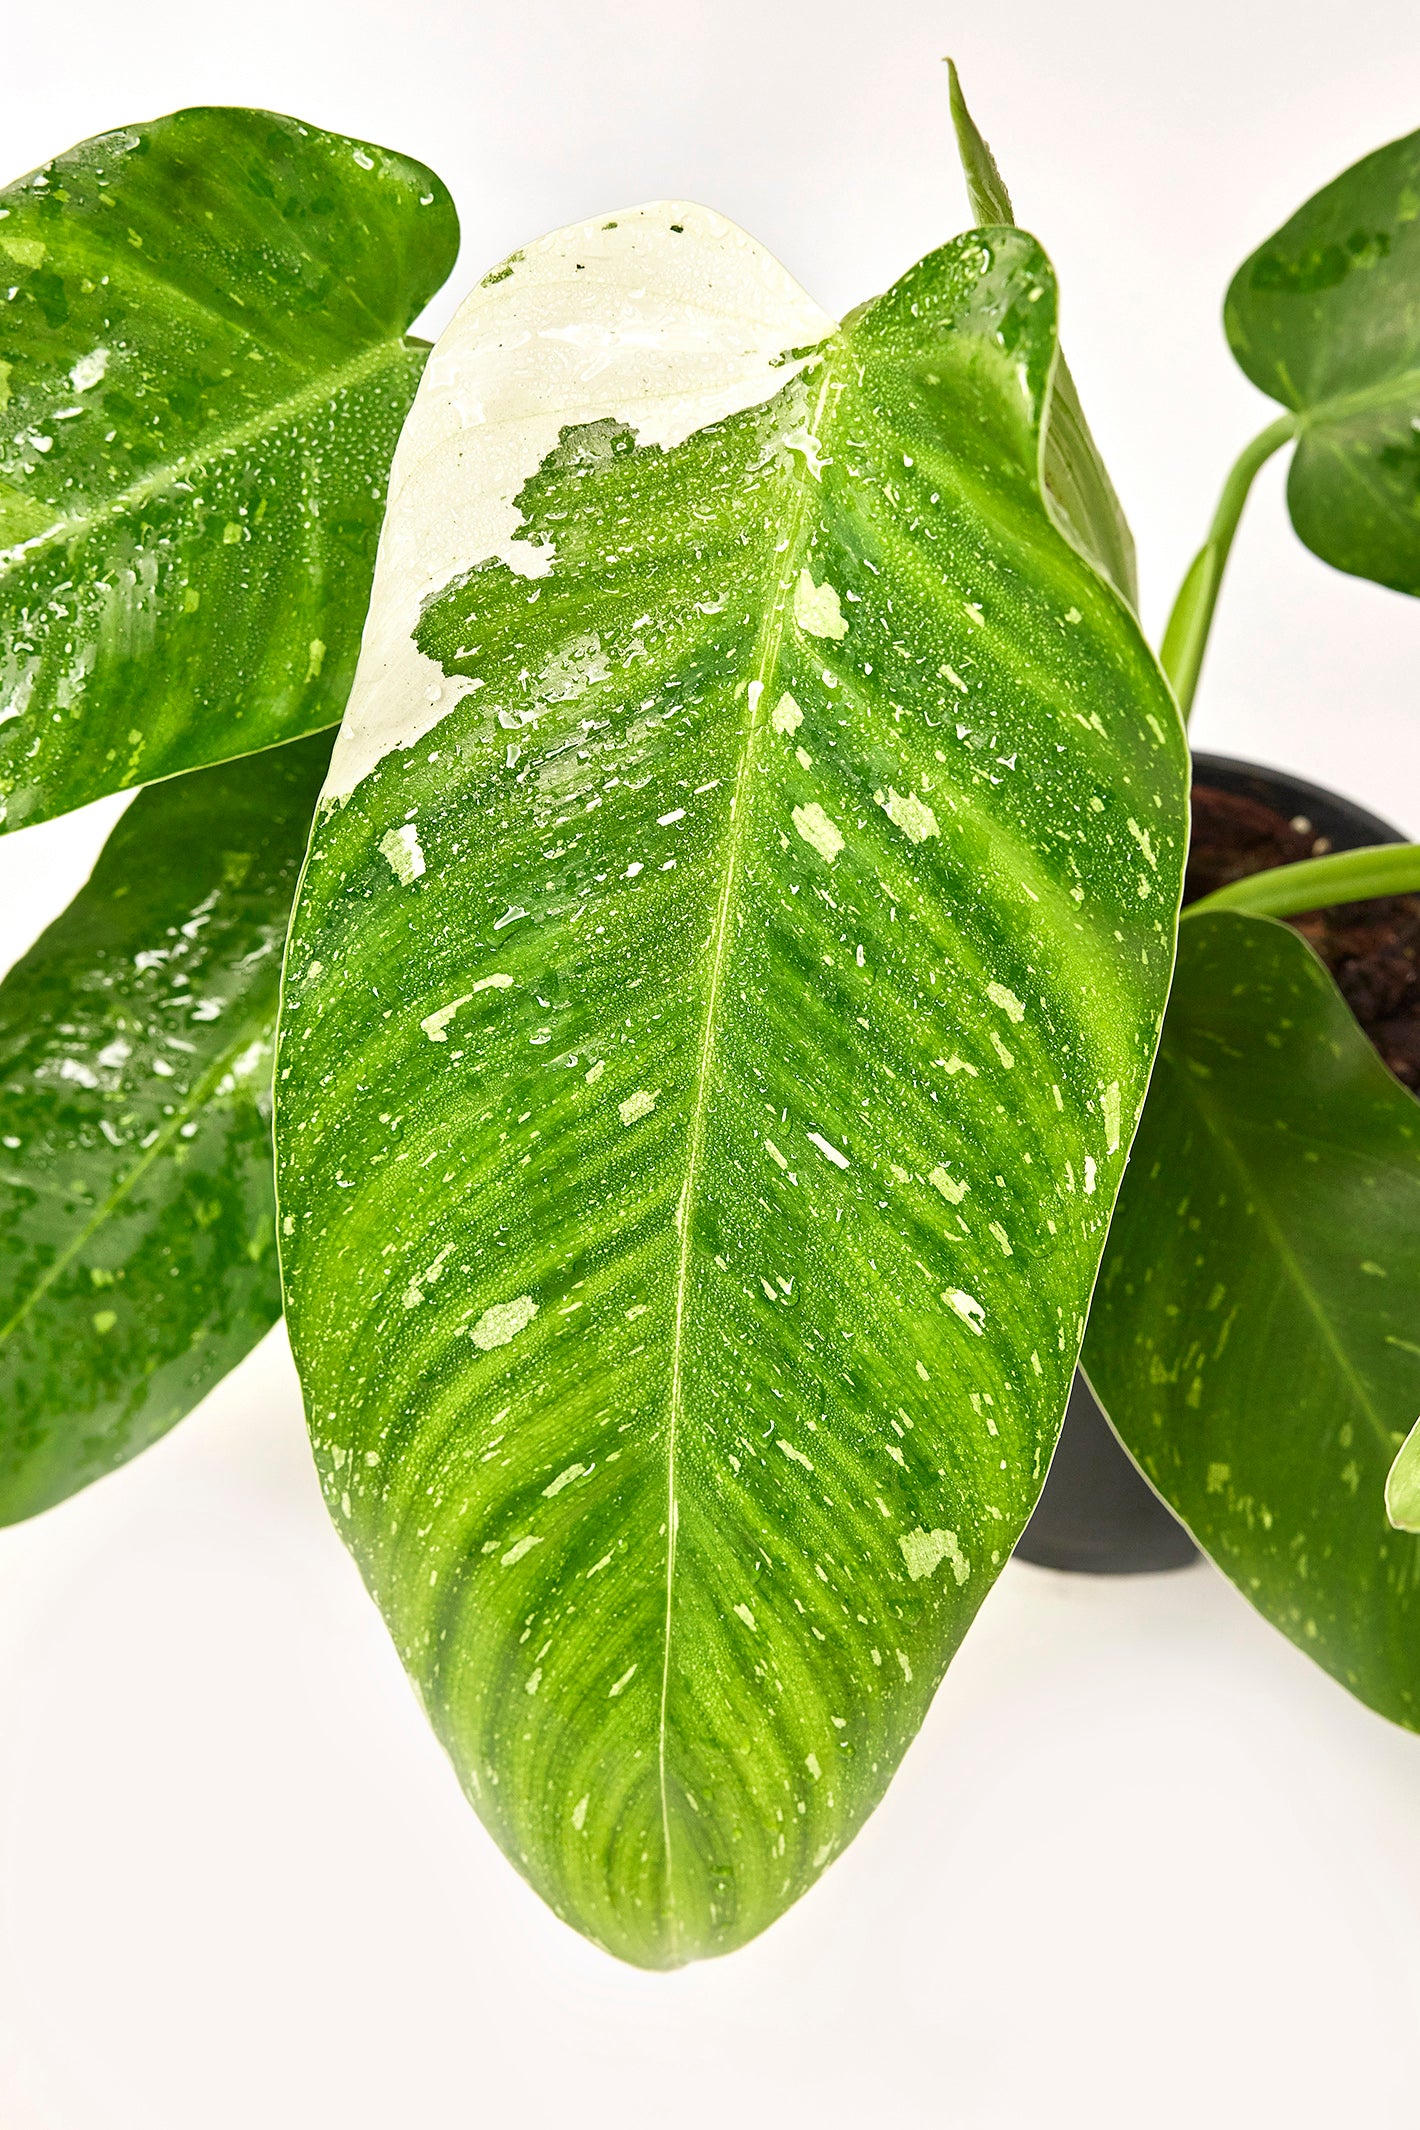 Philodendron Jose Buono (3-4 Leaves) (2 plants in 1 pot)